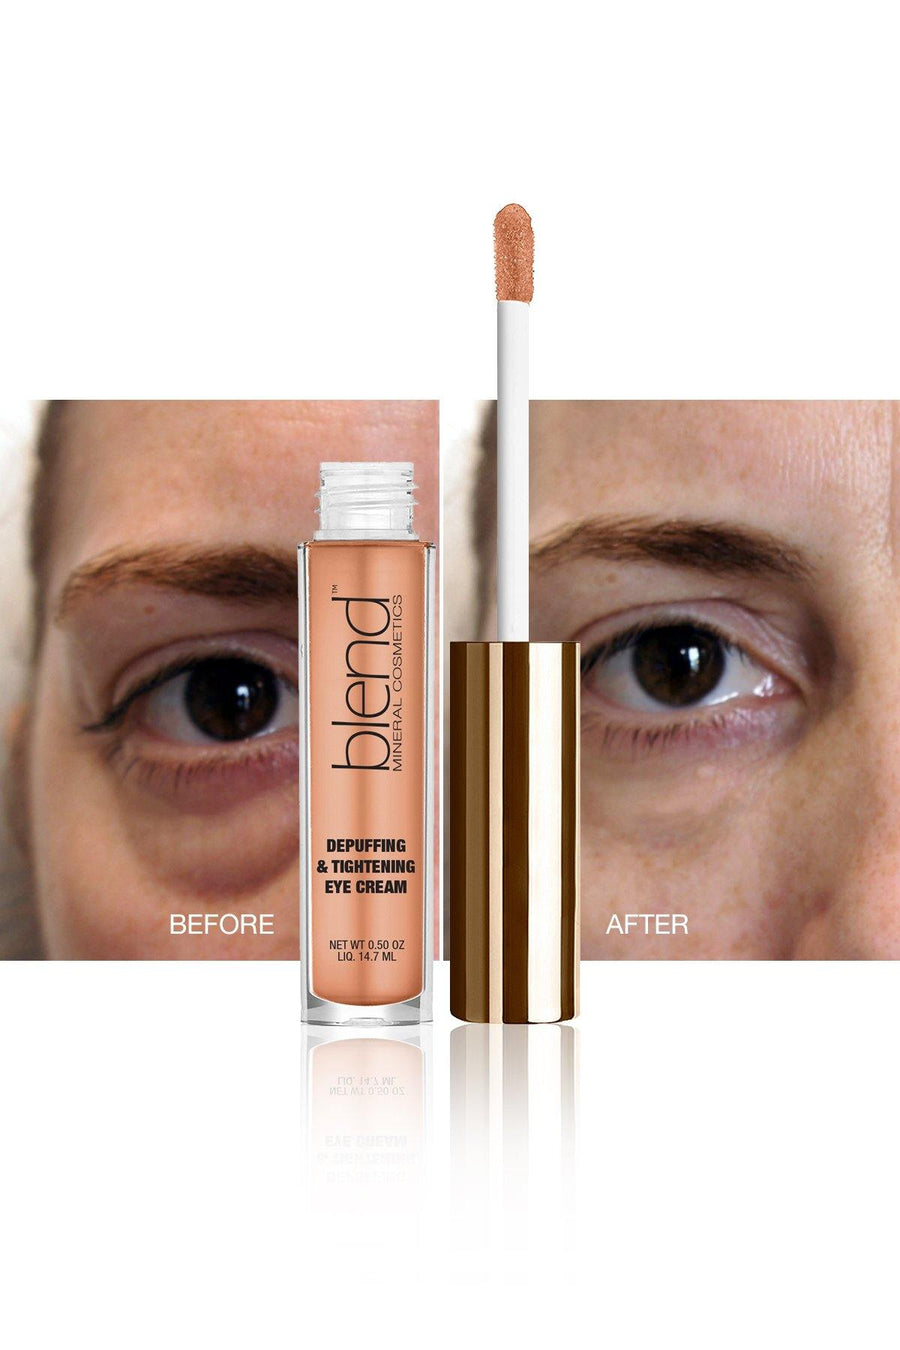 Depuffing & Tightening Eye Cream FREE - ENDS IN 3 DAYS ! - Blend Mineral Cosmetics